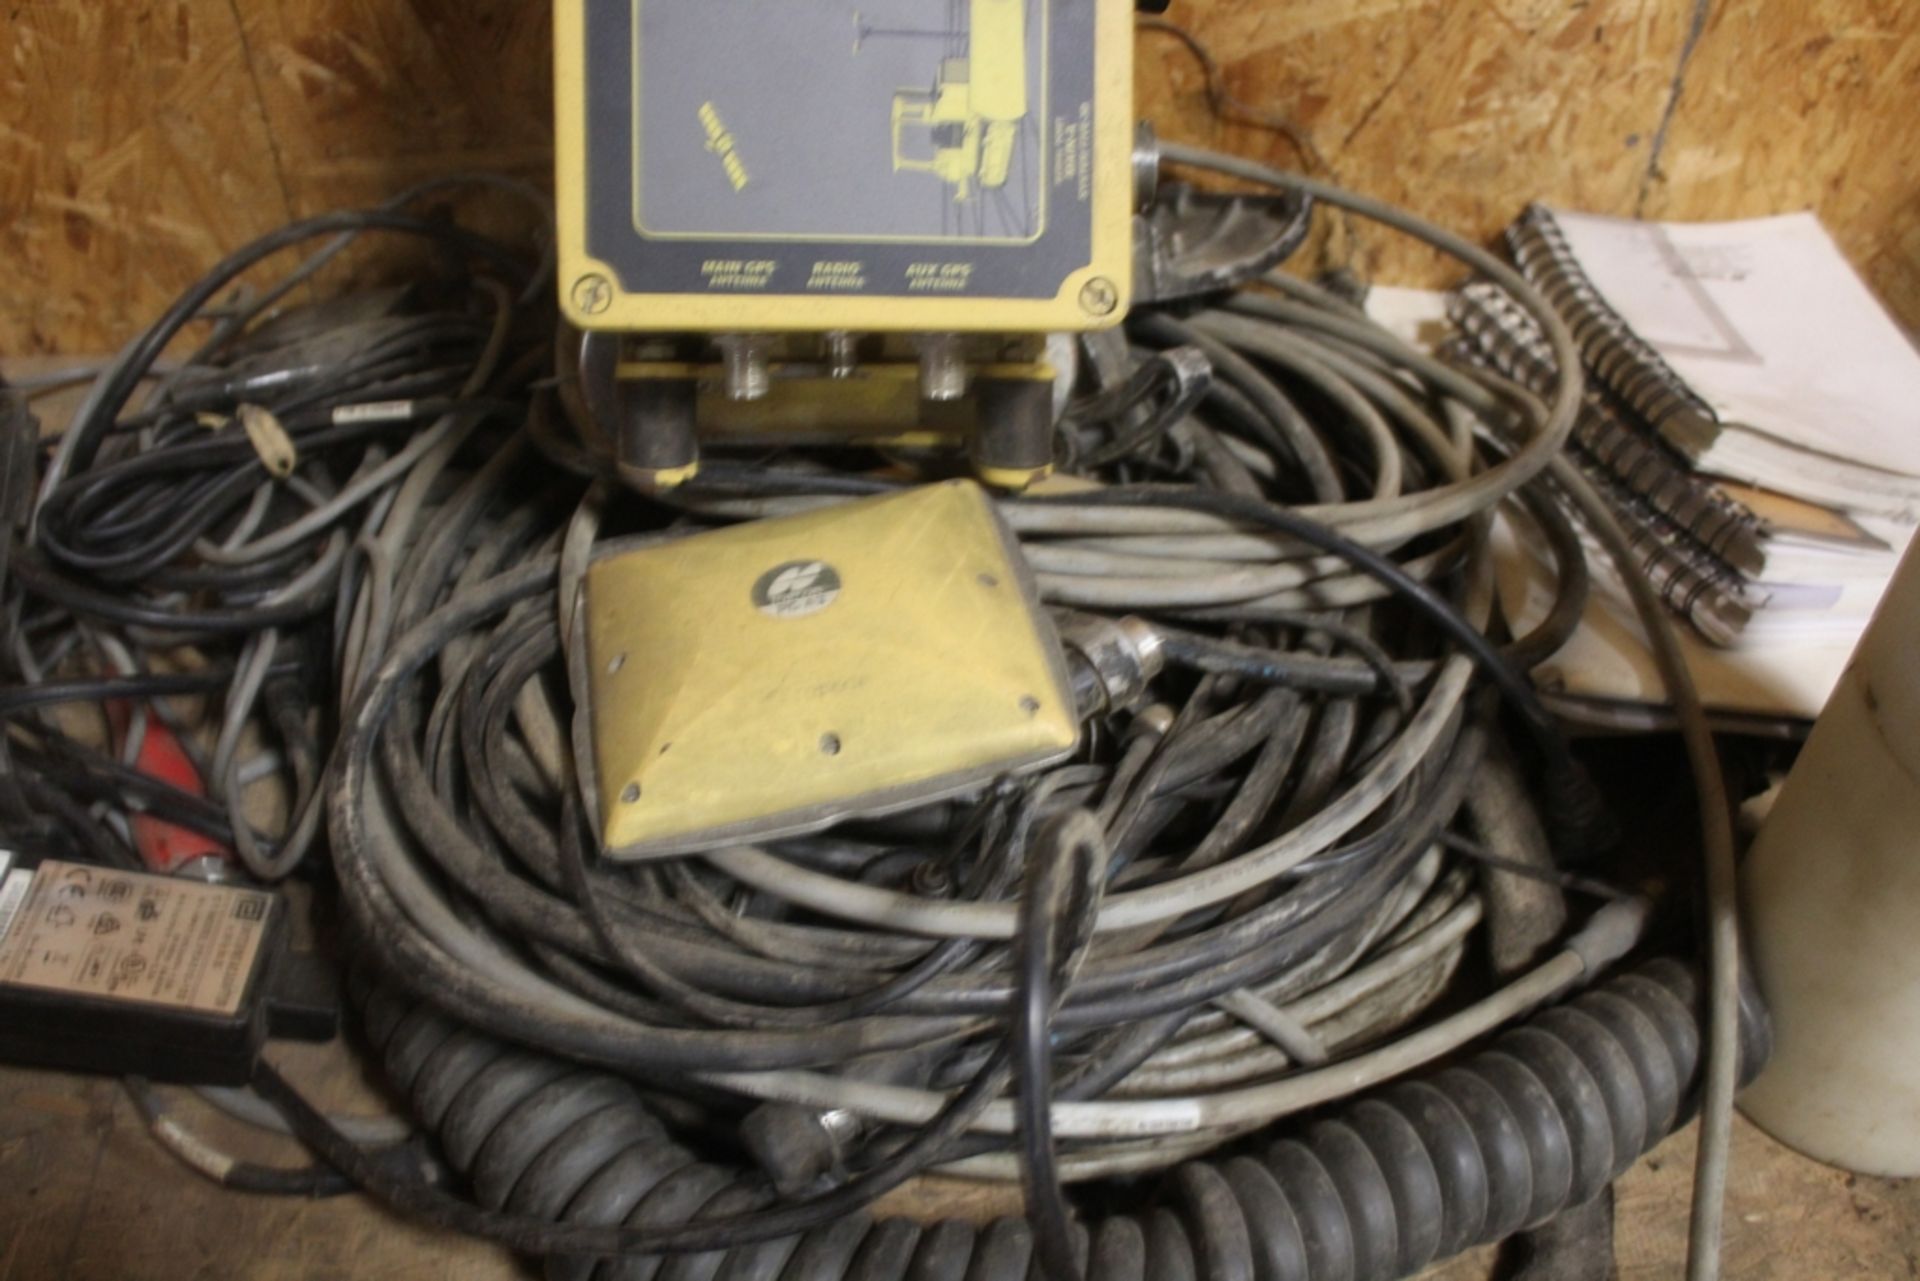 TOPCON UHF DUAL ANTENNA 3D GPS MACHINE CONTROL, WITH ASSORTED CABLES, ETC. - Image 3 of 3